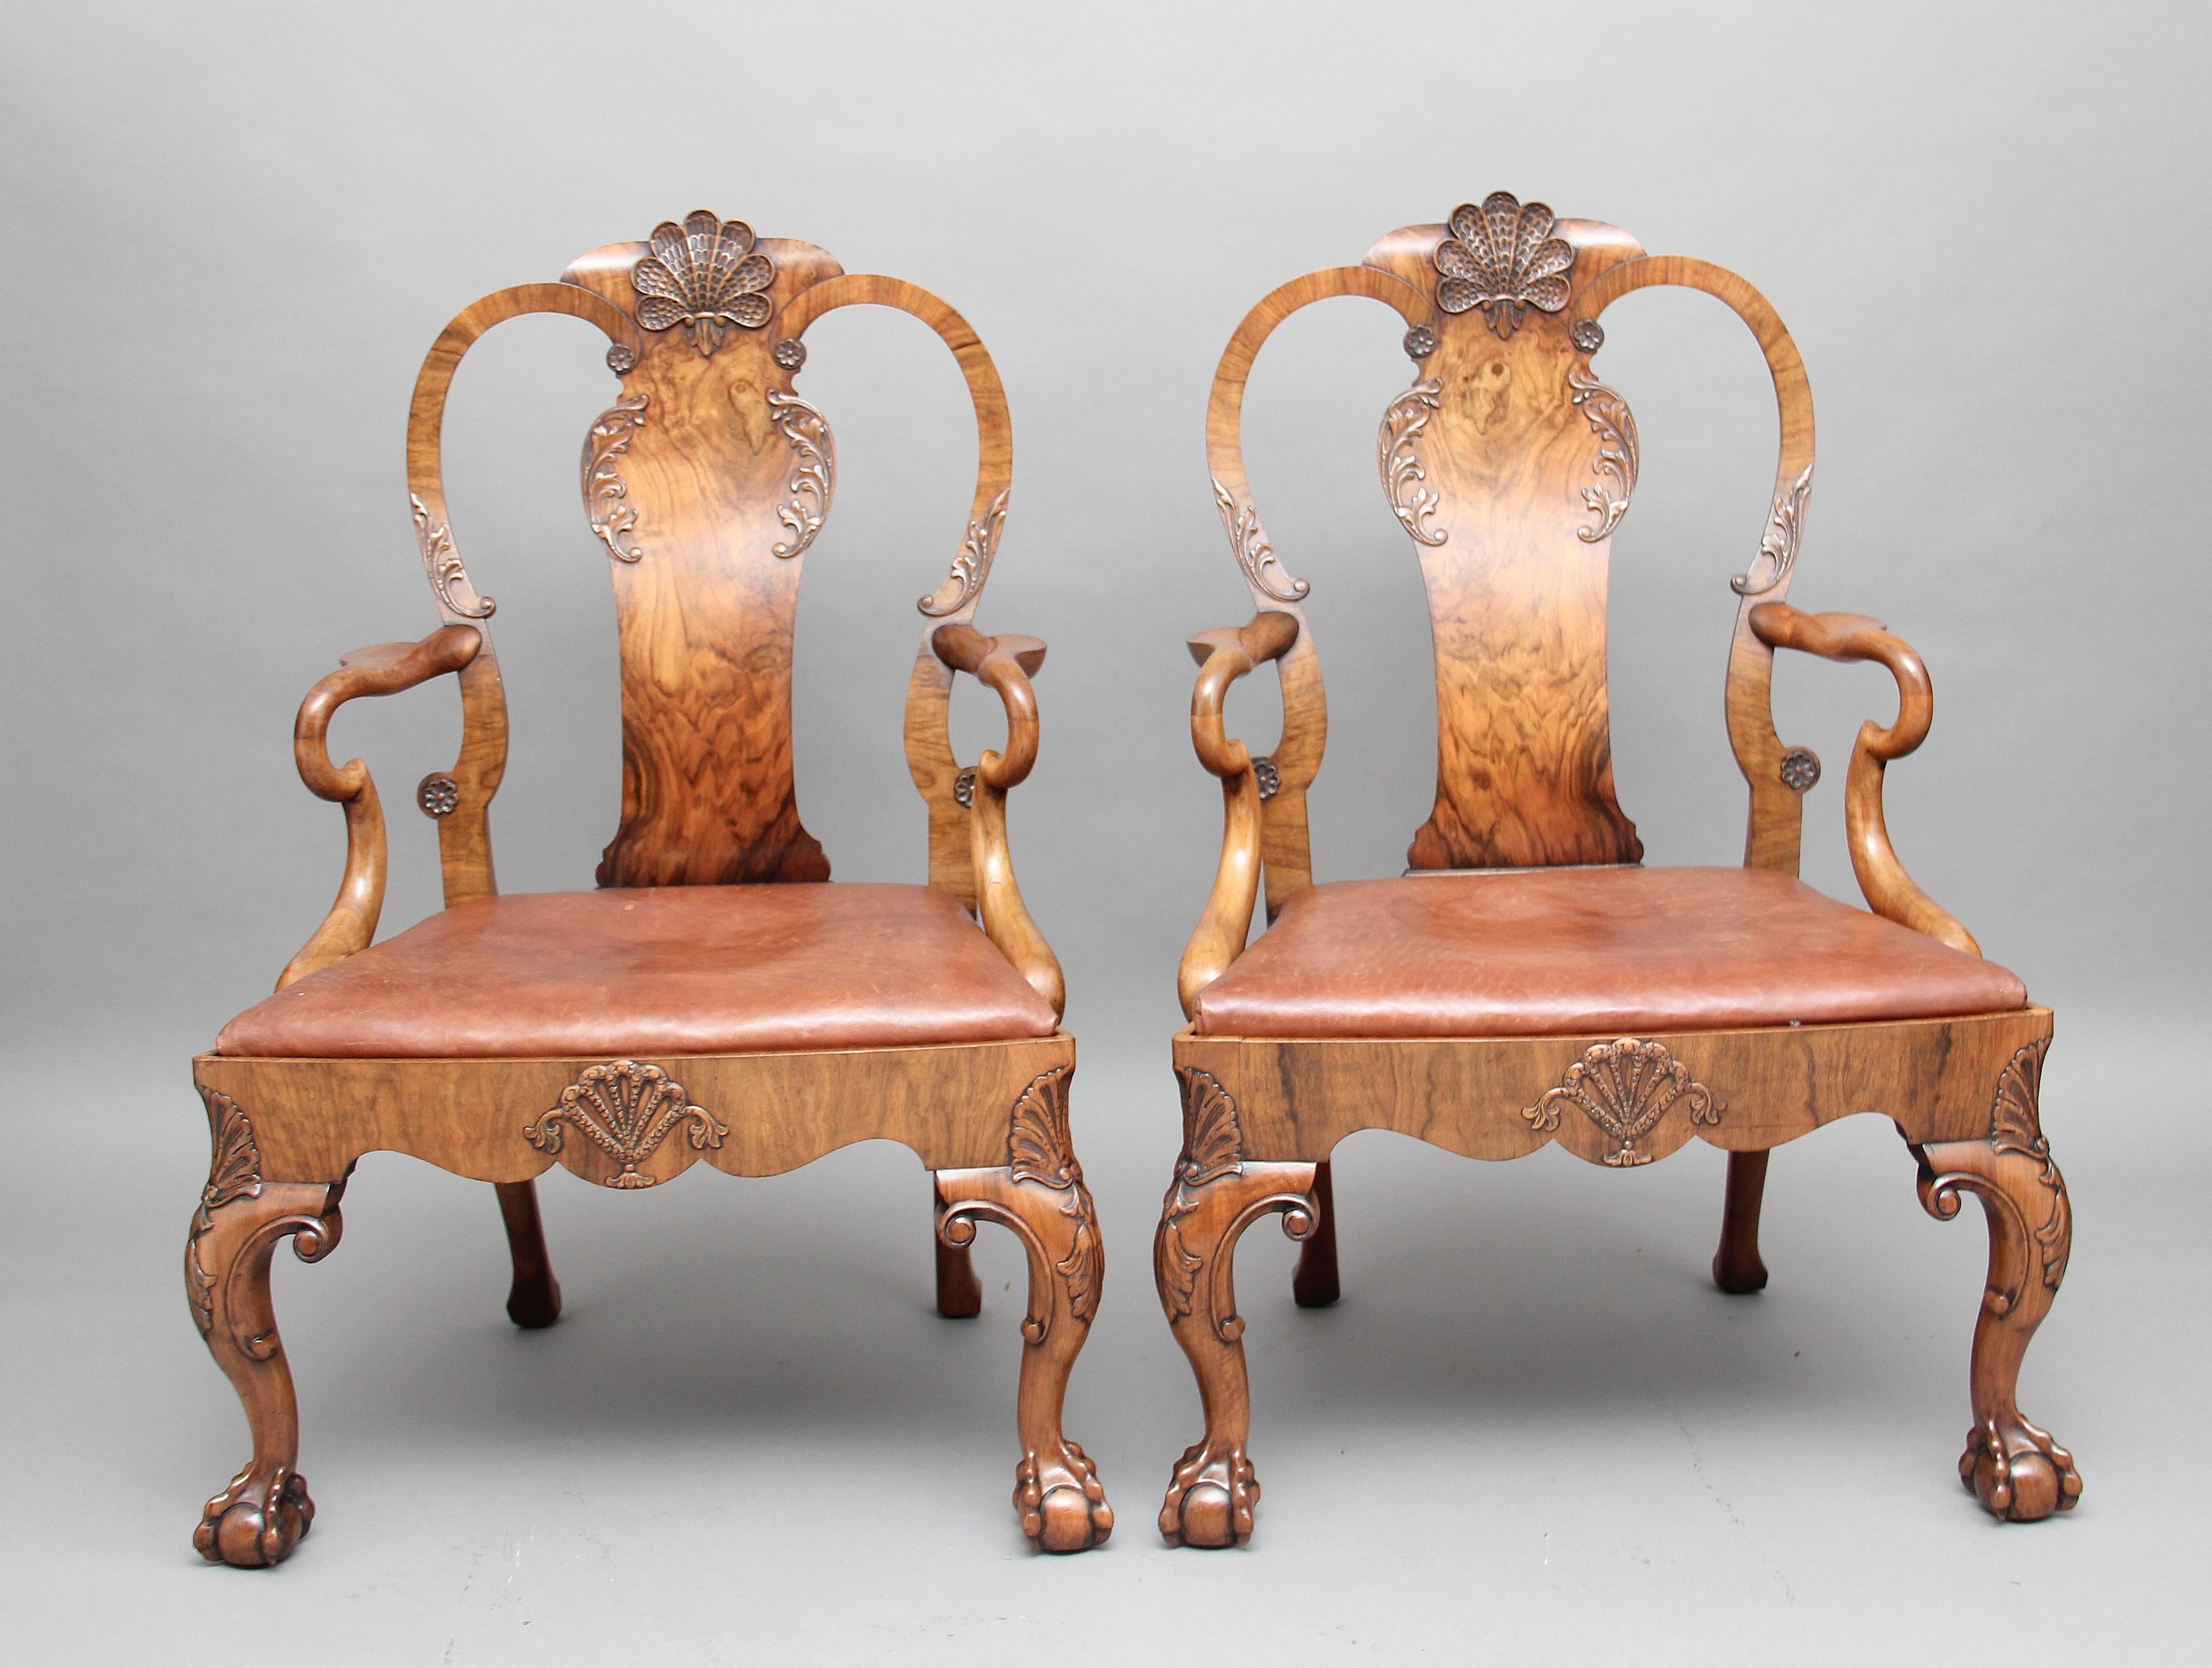 A superb pair of early 20th century walnut armchairs in the early Georgian style, the shaped splat back with a carved scallop shell and foliate decoration, with lovely sweeping shepherds crook arms and tan leather seats and shaped seat rails,